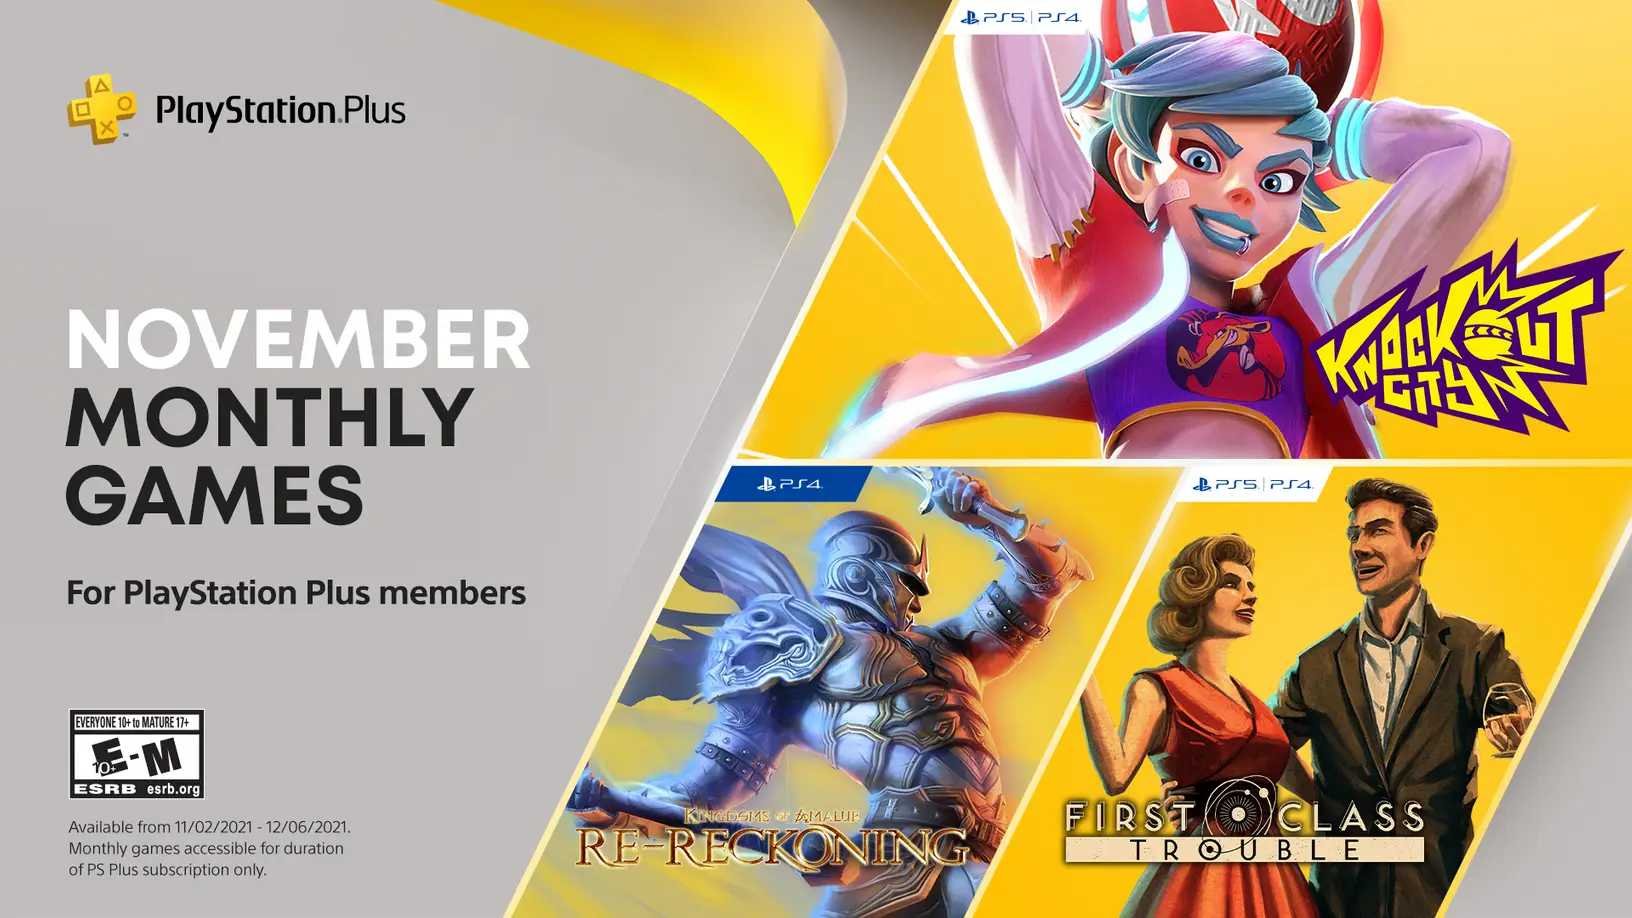 PlayStation Plus Monthly Games lineup for November 2022 announced